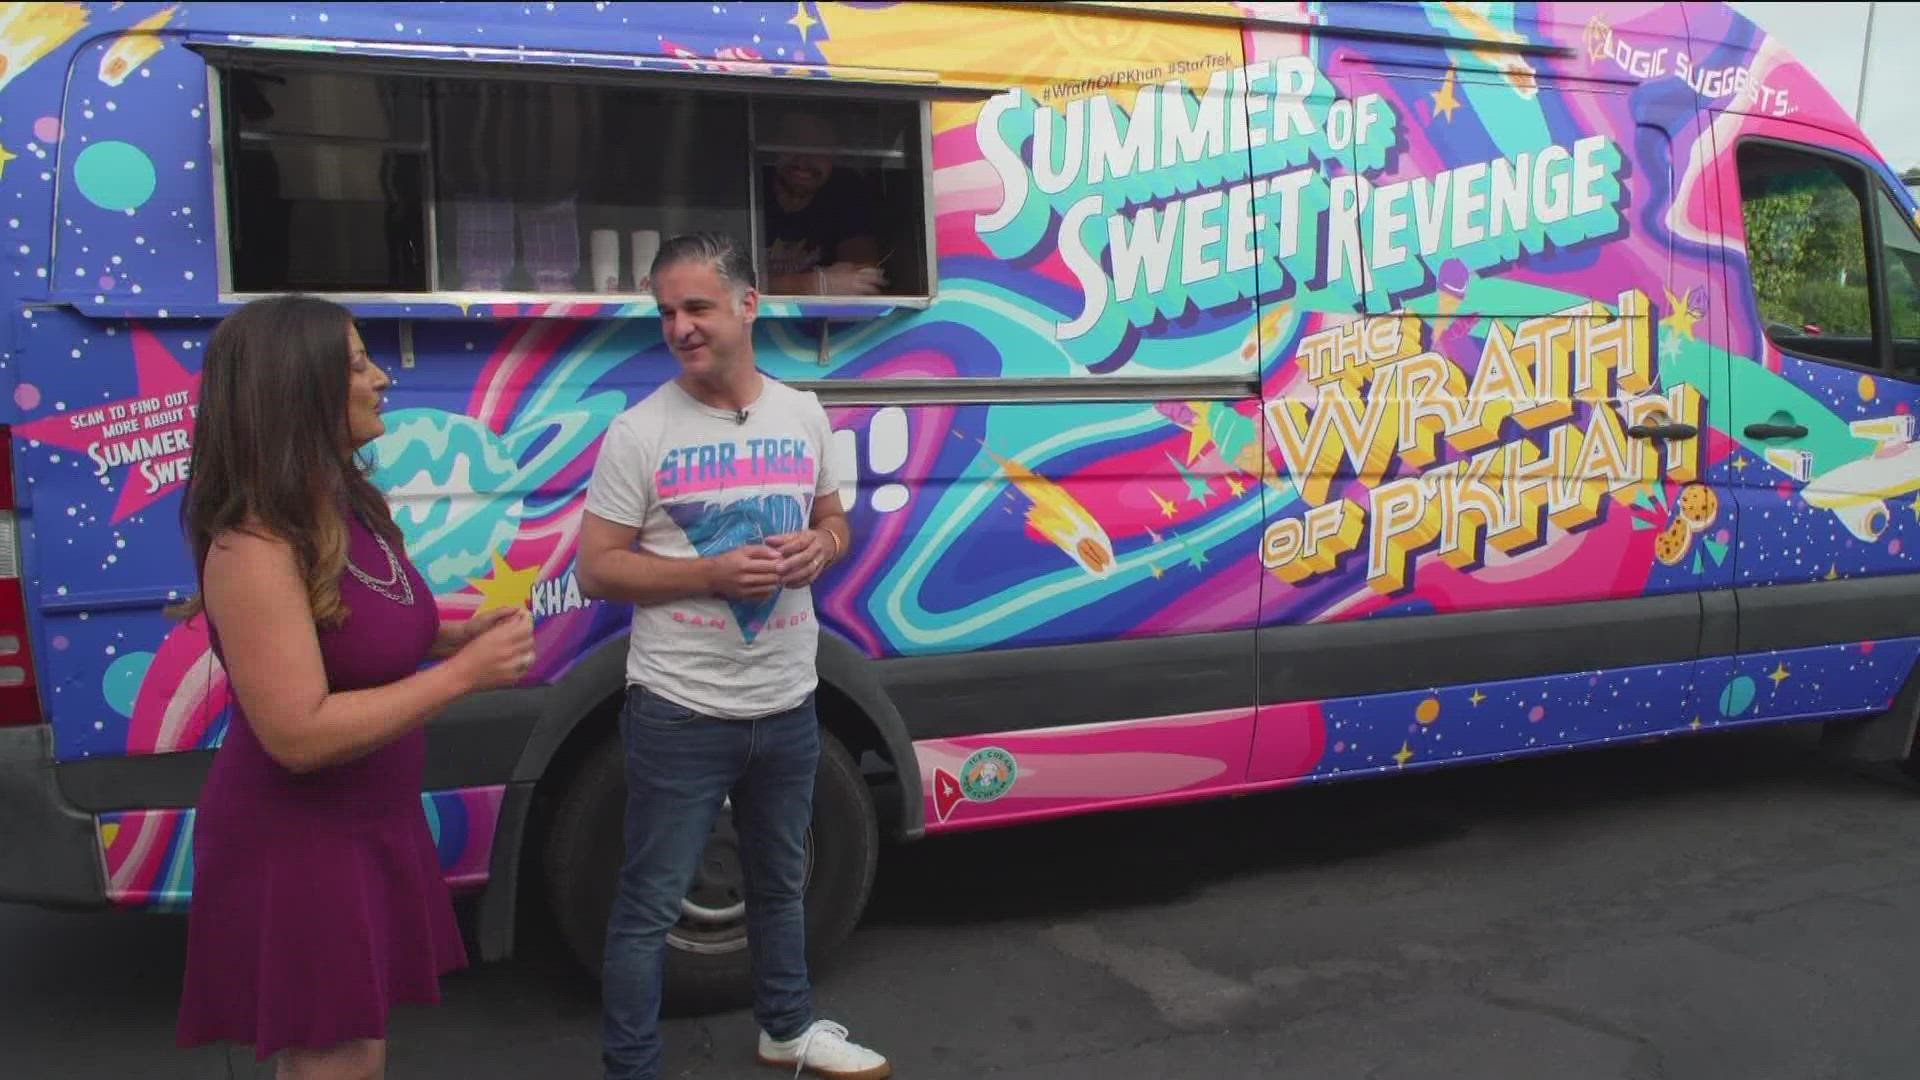 Sam Ades joined the show to show off the ice cream truck and talk about where you can get free treats this weekend.